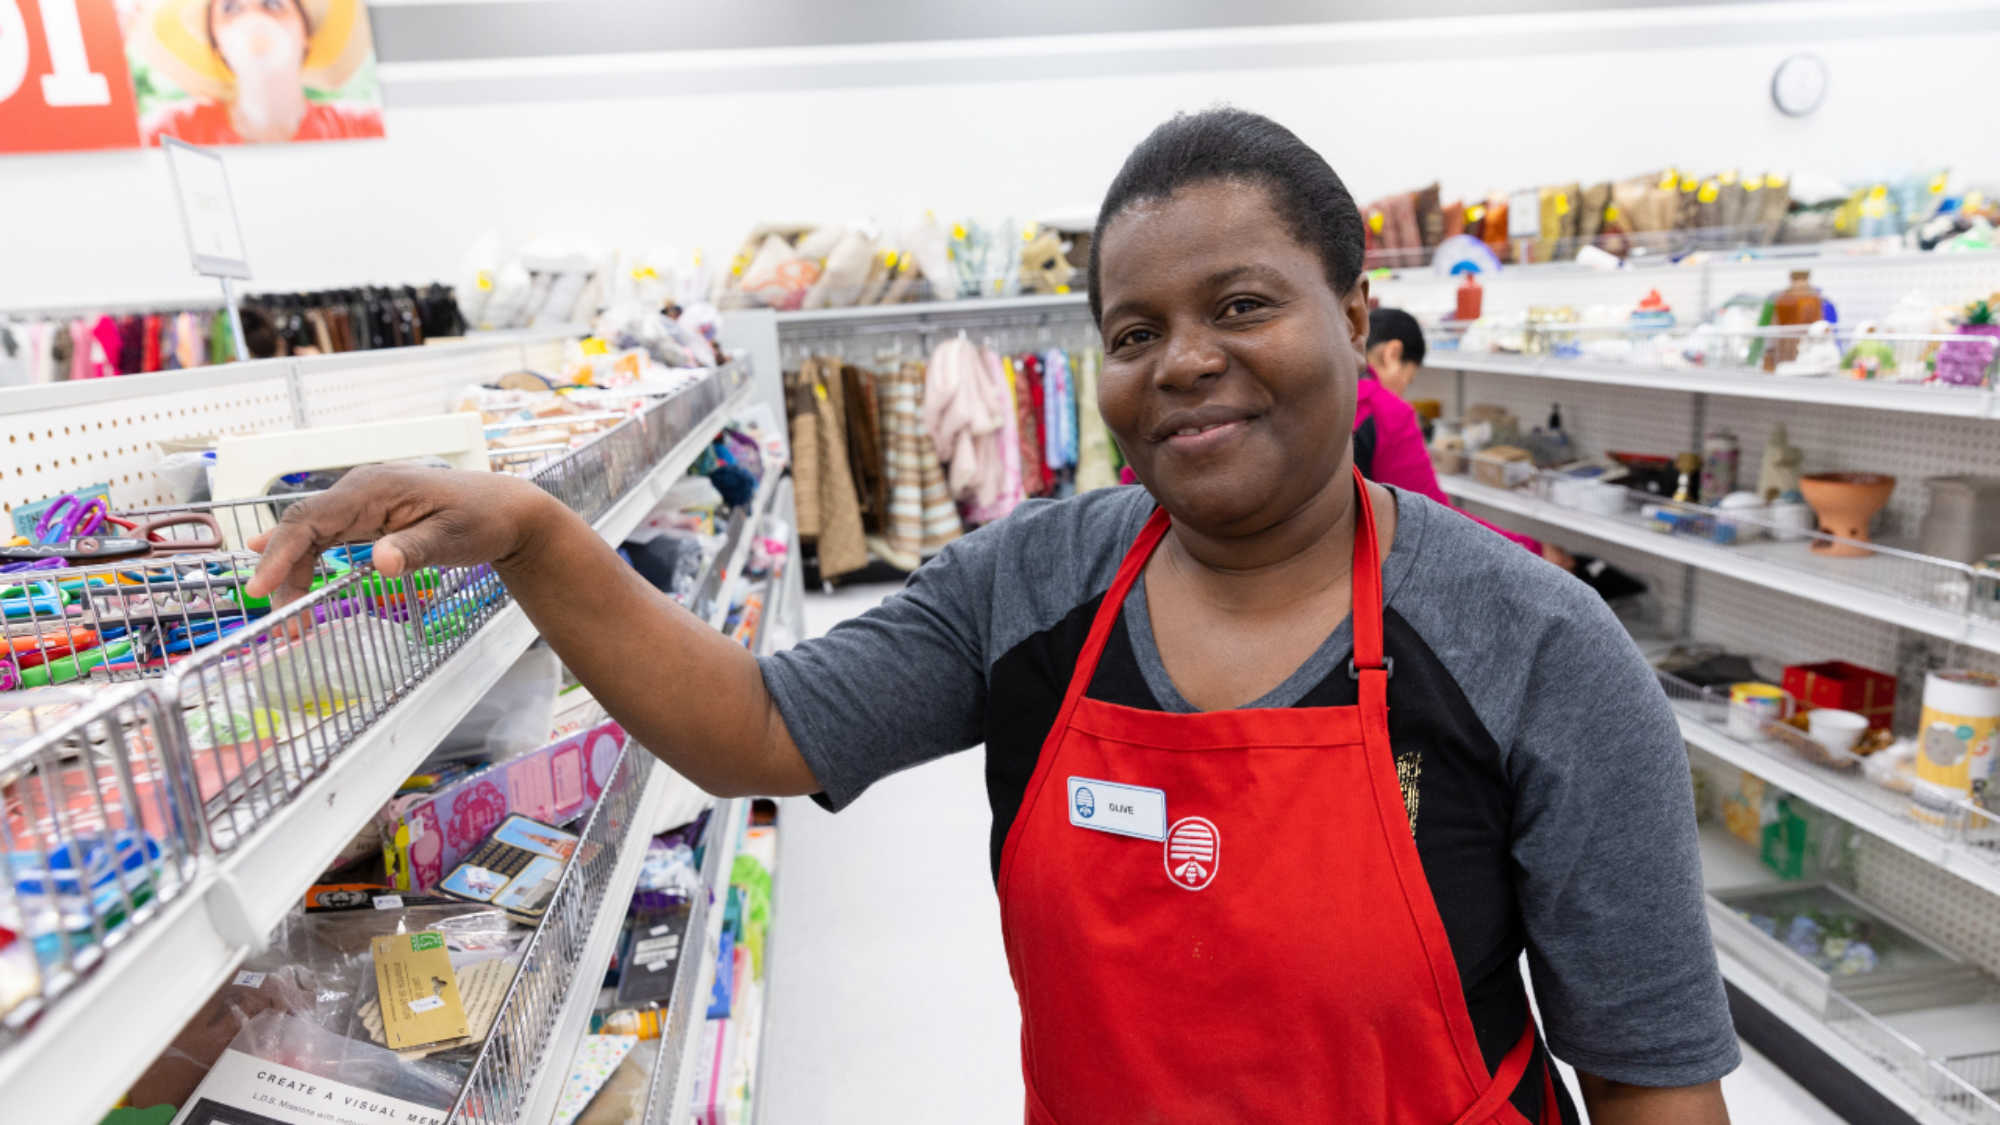 A female DI associate smiles next to the store shelves she has been organizing.